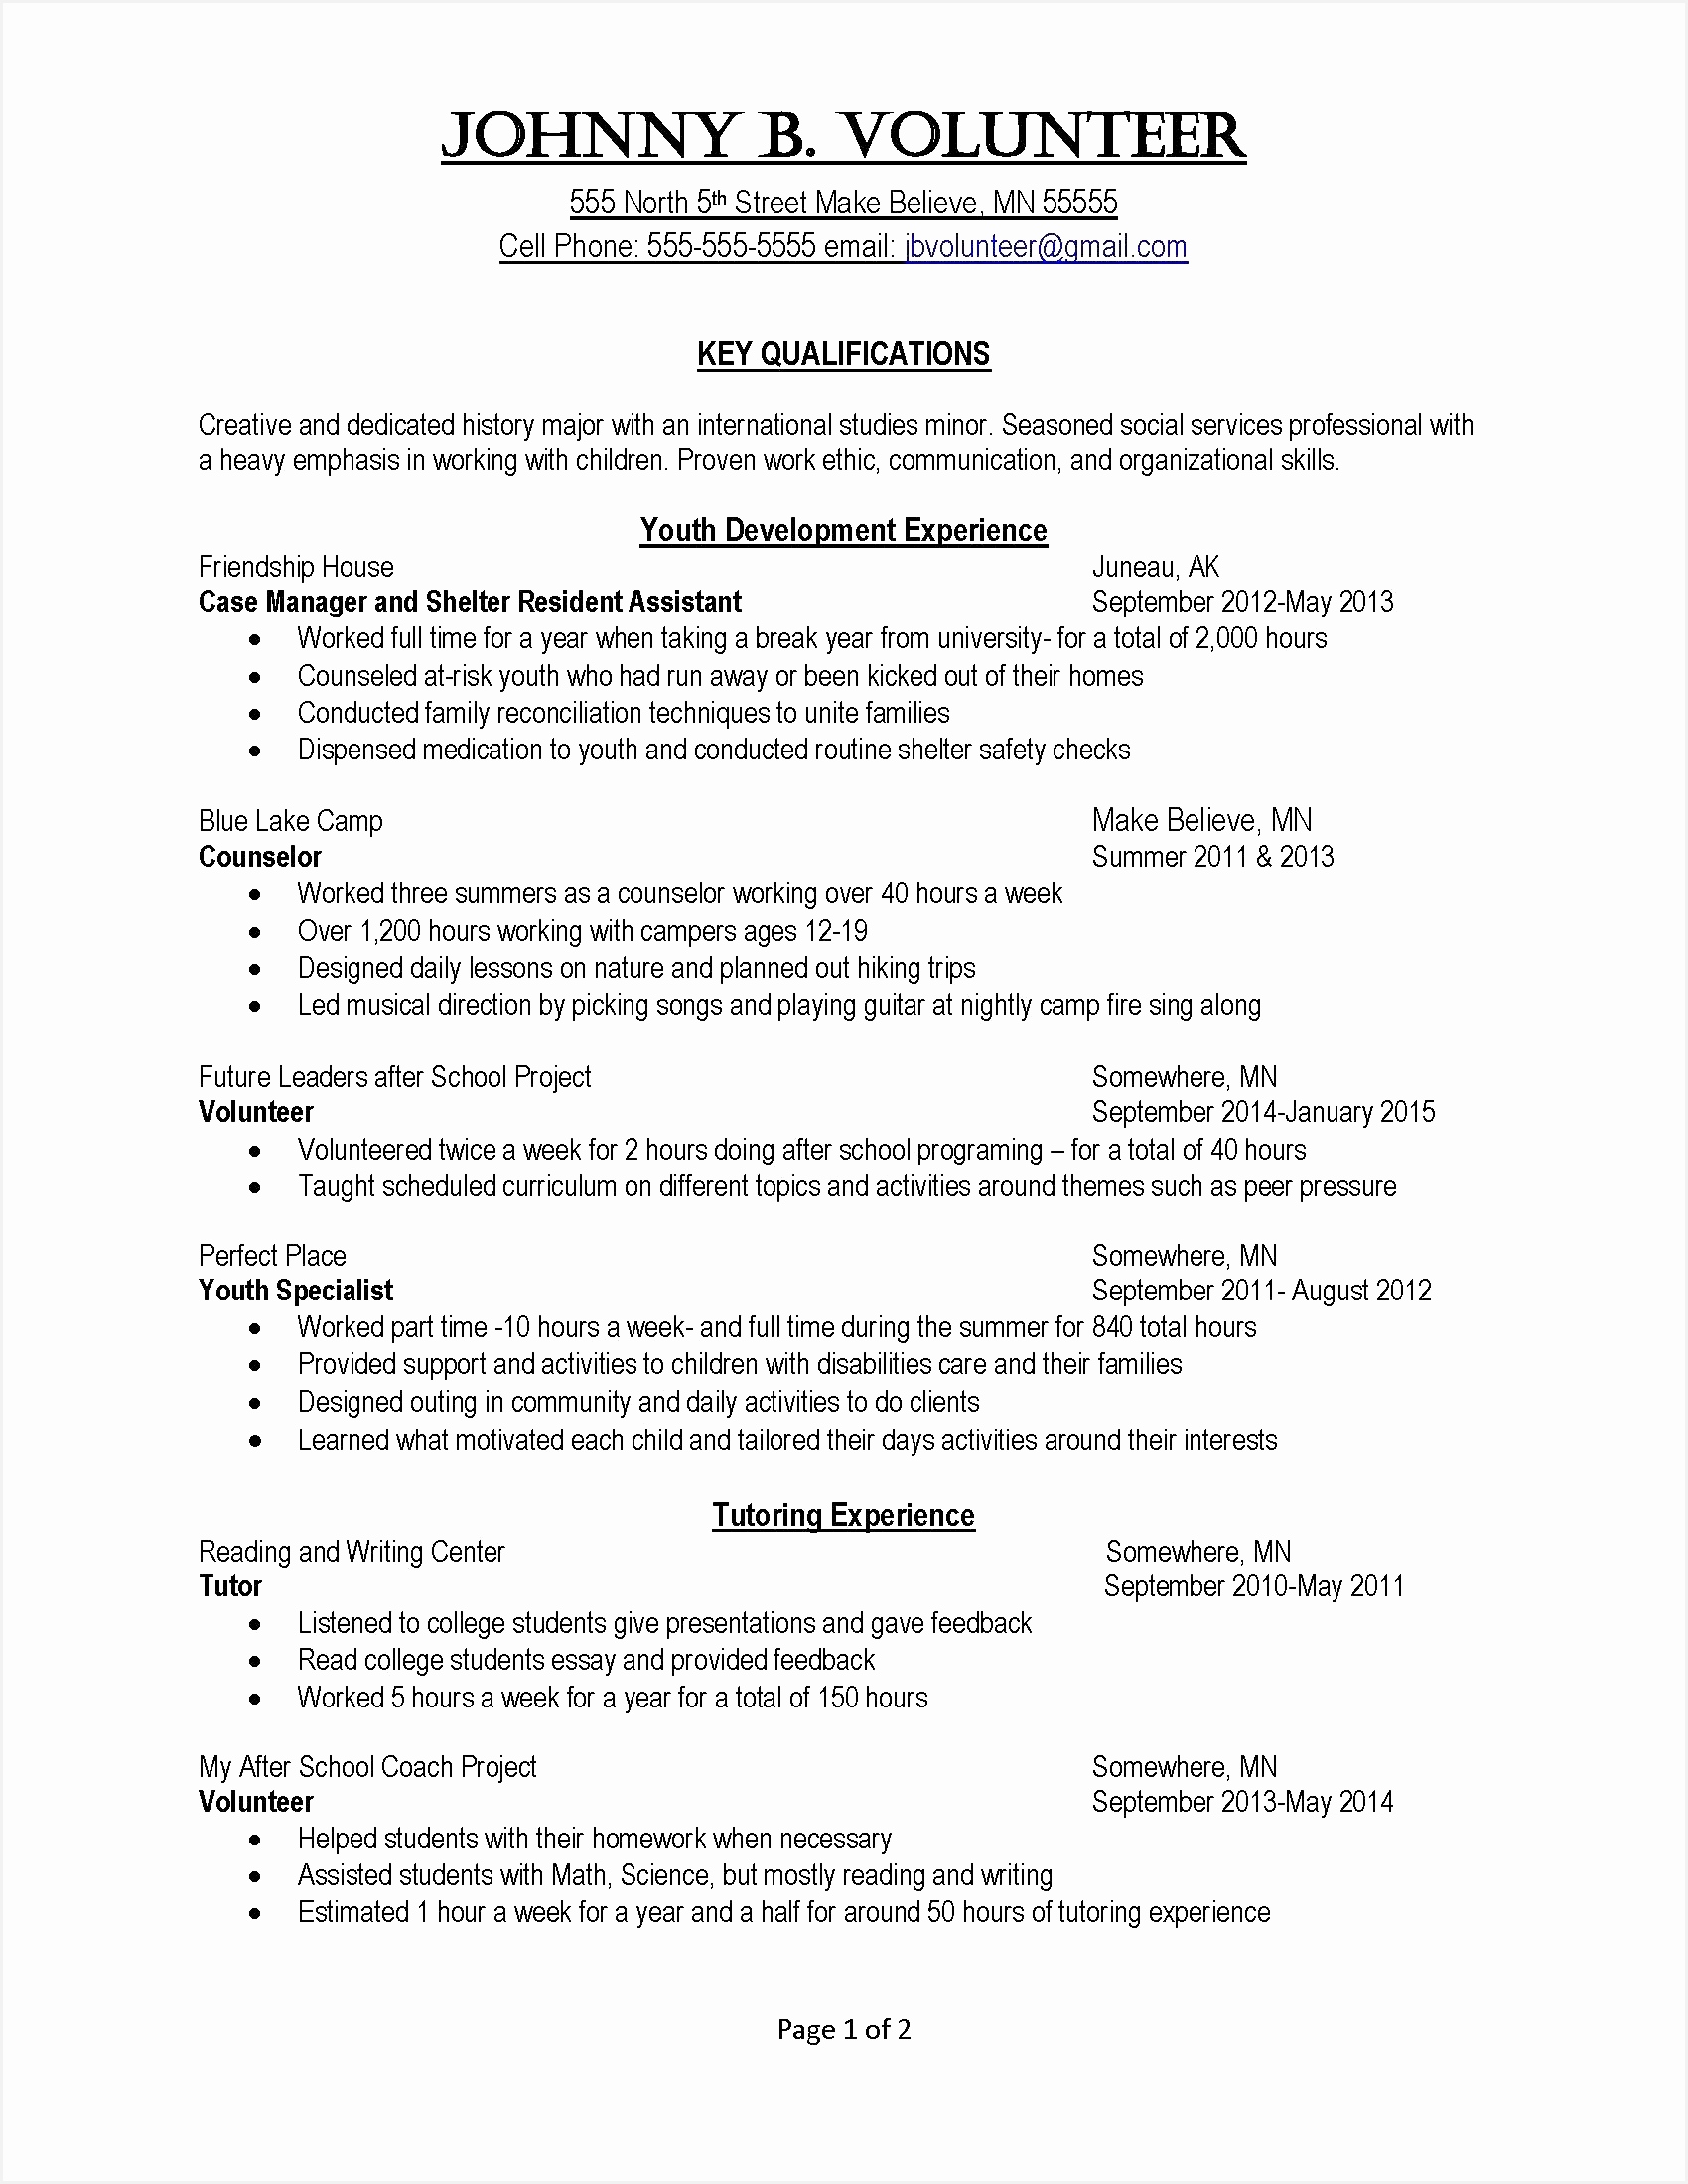 Sample Cover Letter Resume Awesome Cover Letter Template Modern Copy Od Consultant Cover Letter Web Fresh Google Docs22001700